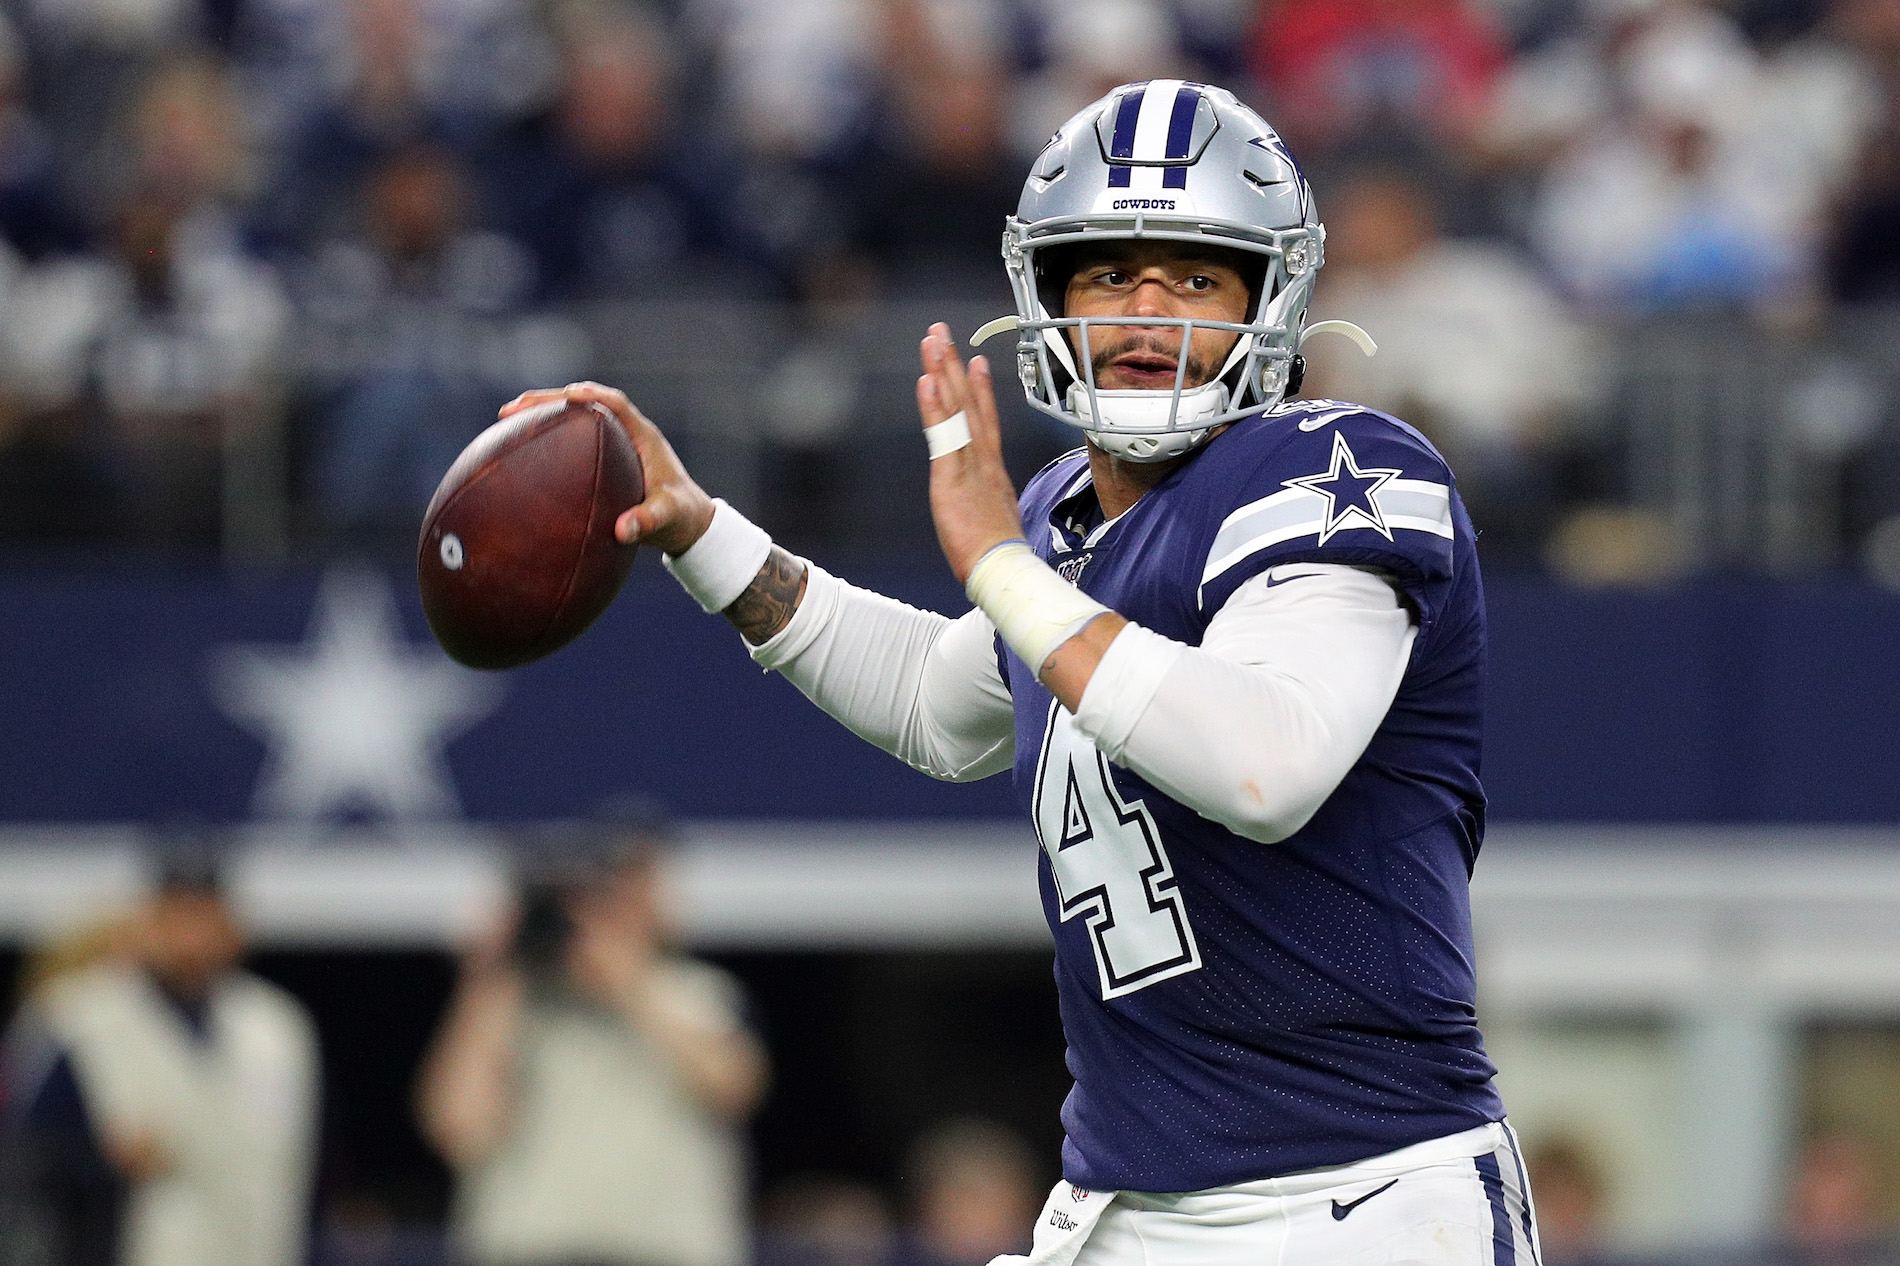 The July 15 deadline has passed for Dak Prescott to sign a long-term contract with the Cowboys, and the reason is dumber than you'd think.